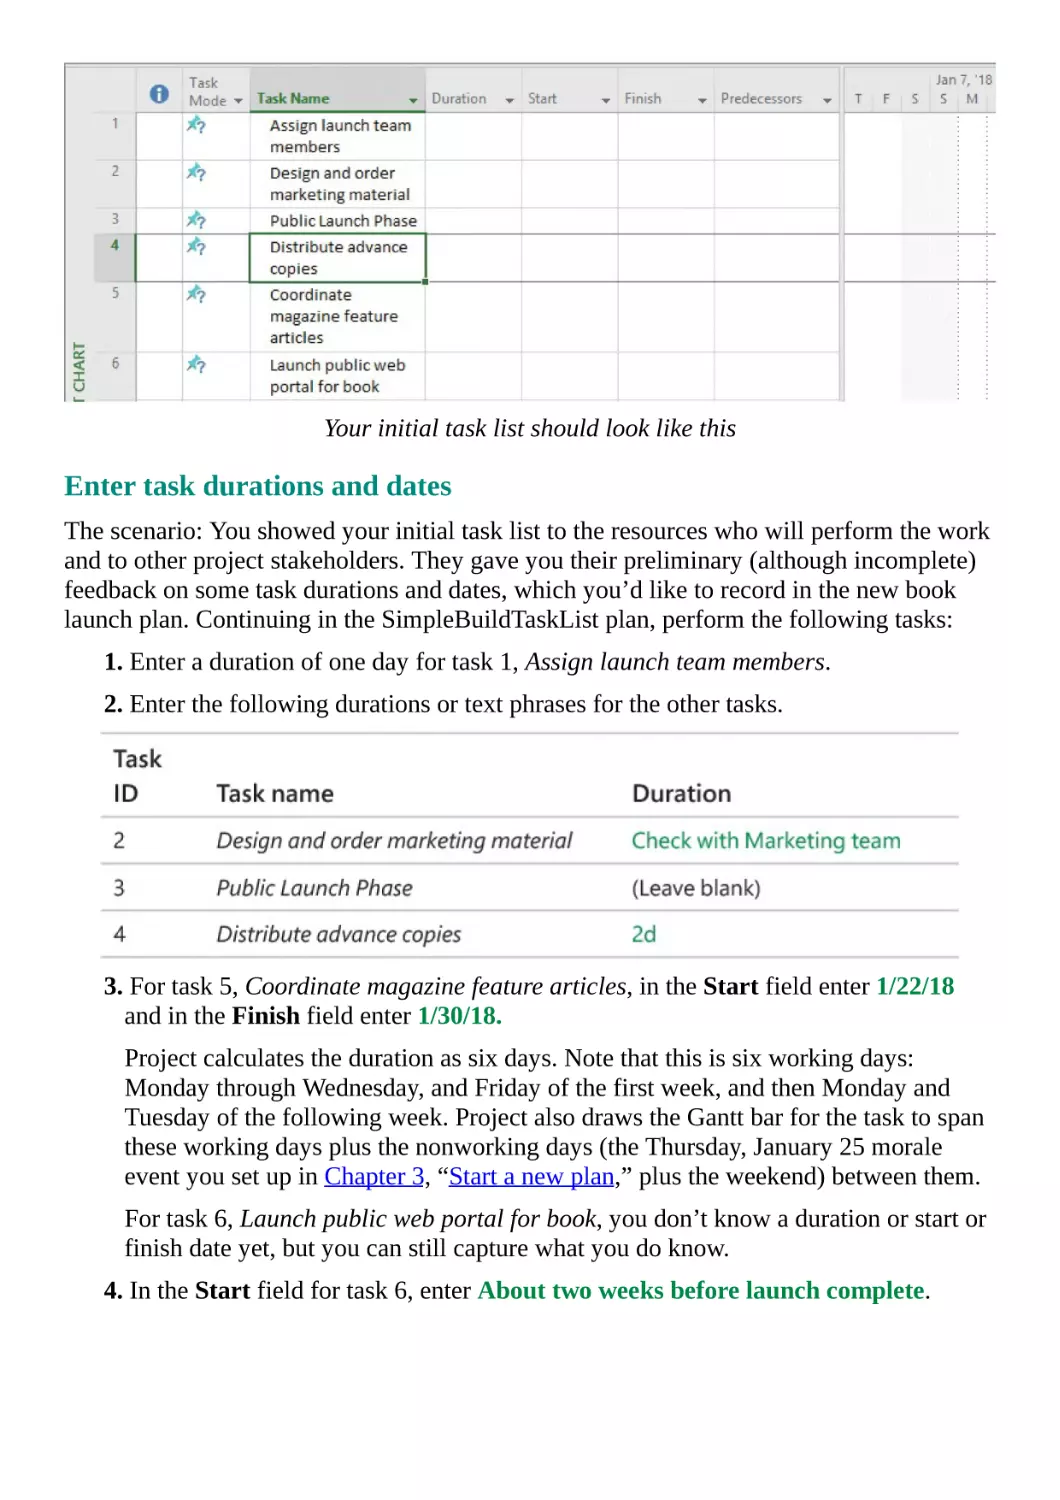 Enter task durations and dates